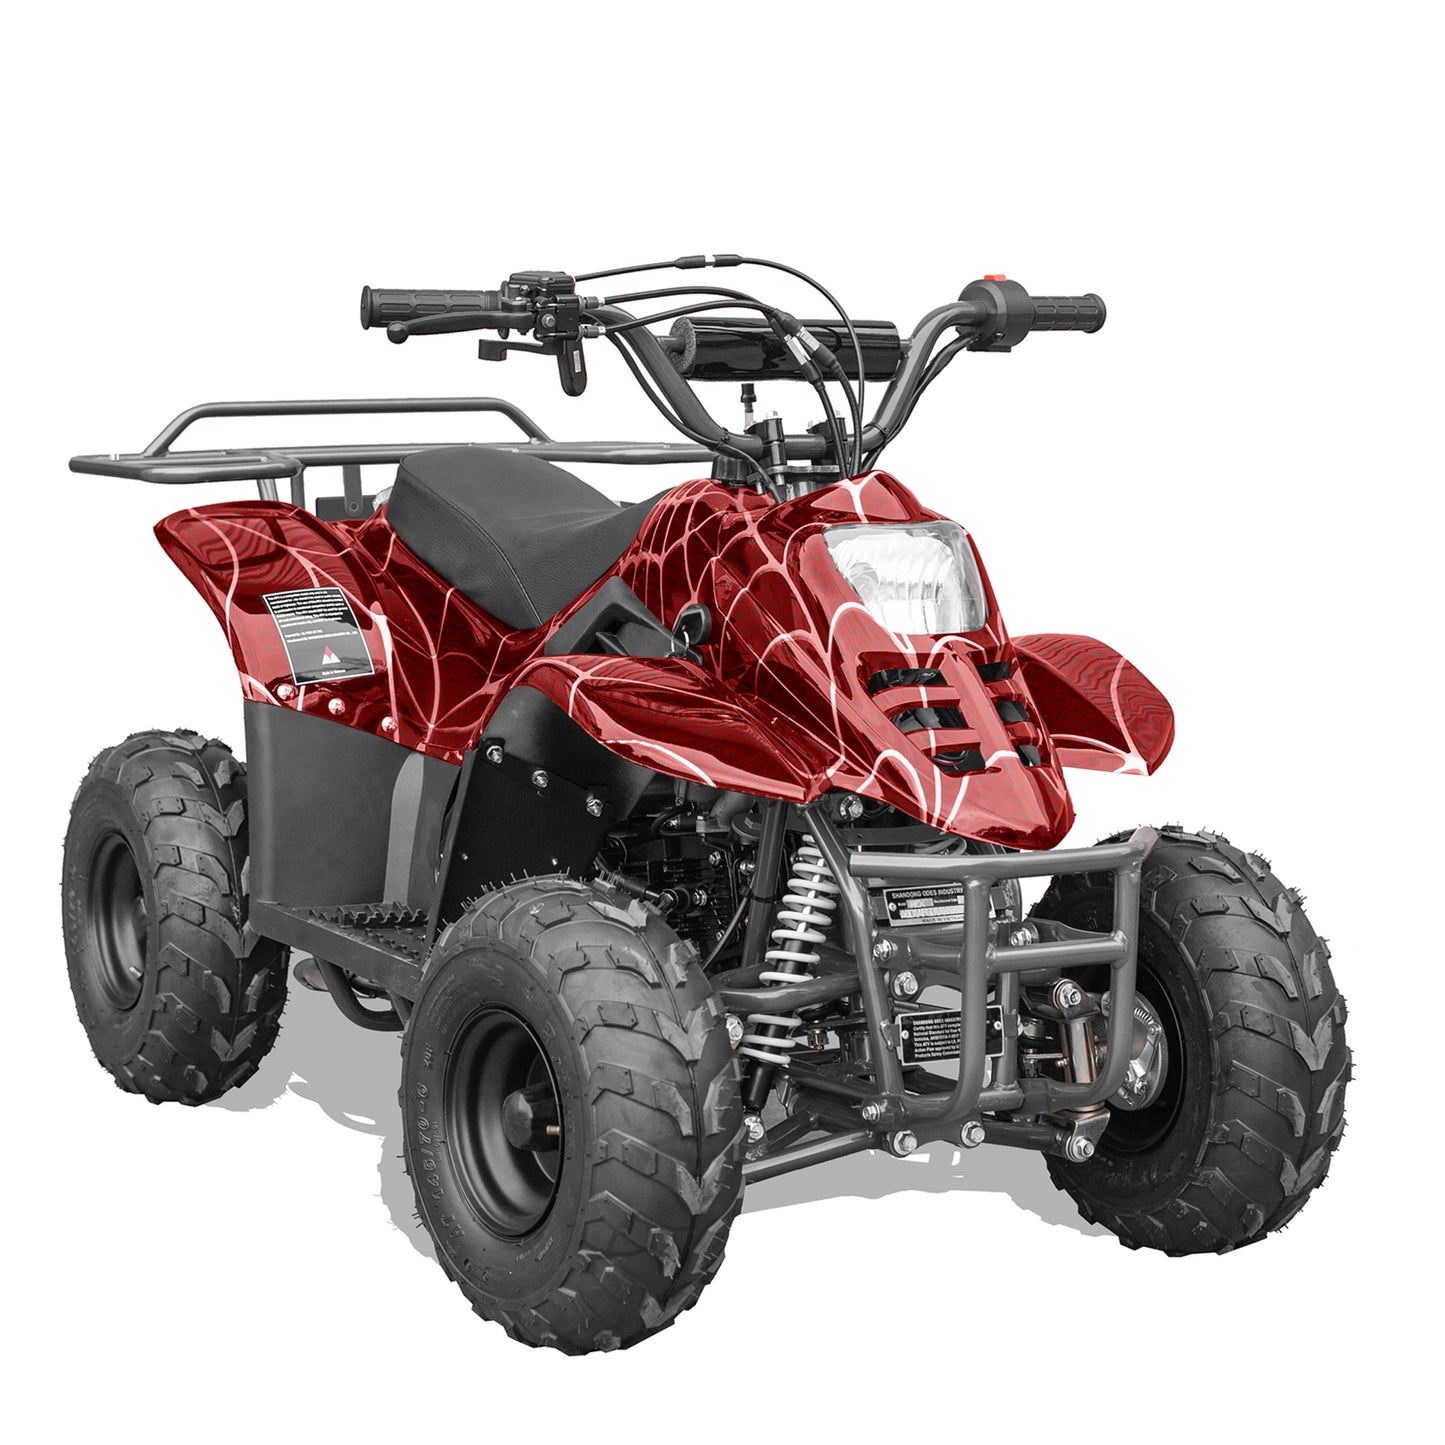 GAS 110cc ATV Quad 4 Wheeler with Off-Road Tires - 220lbs Weight Capacity - Tested and Fully Assembled